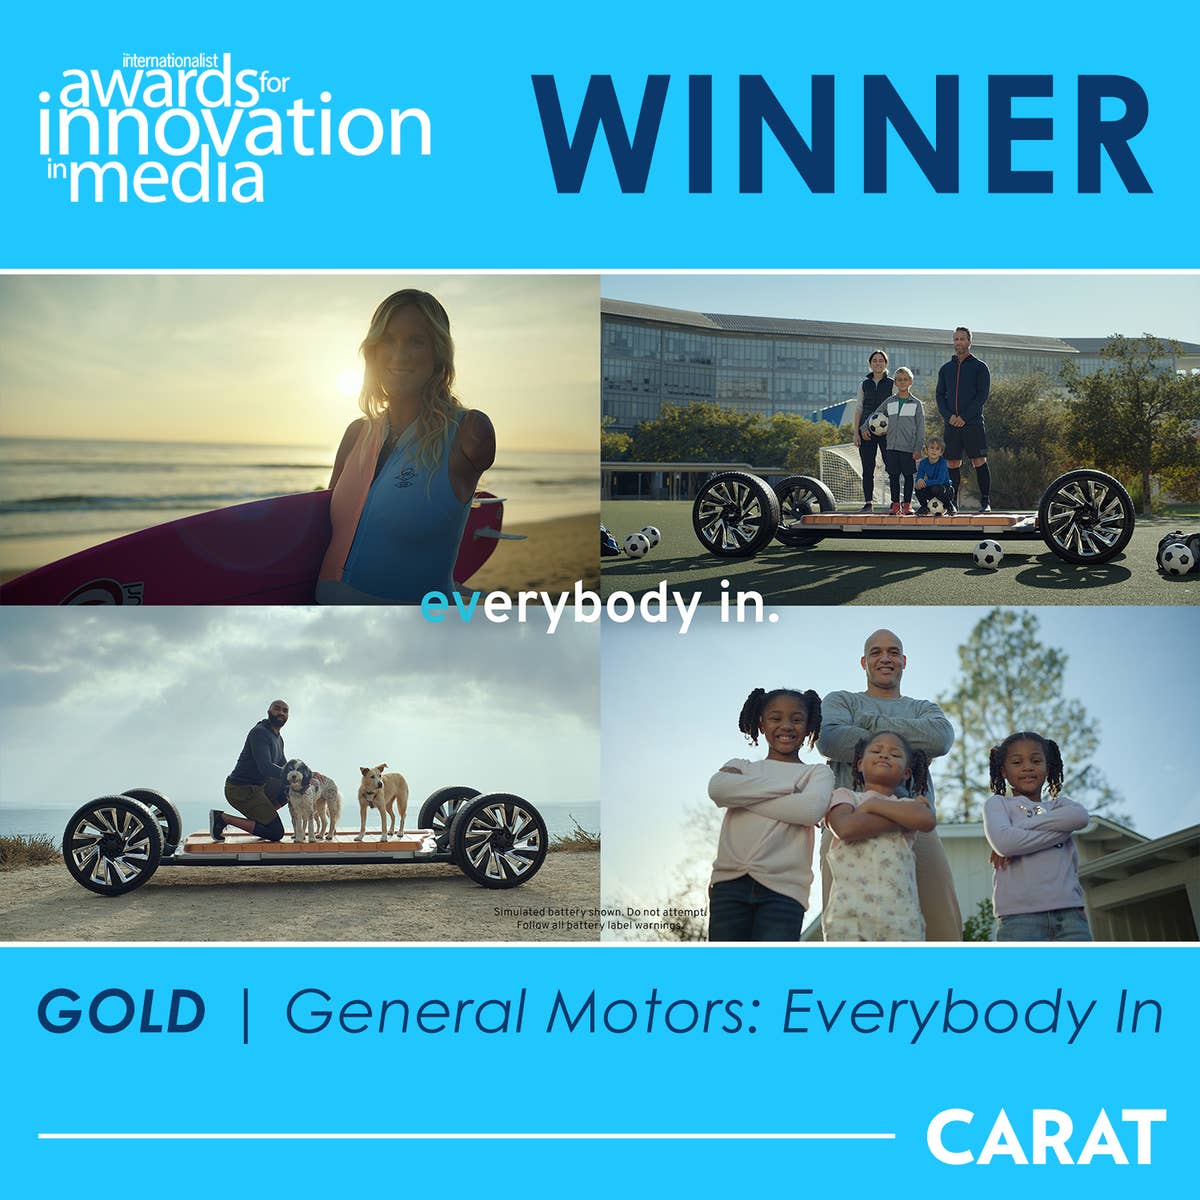 General Motors Everybody In Wins Gold at The Internationalist Awards